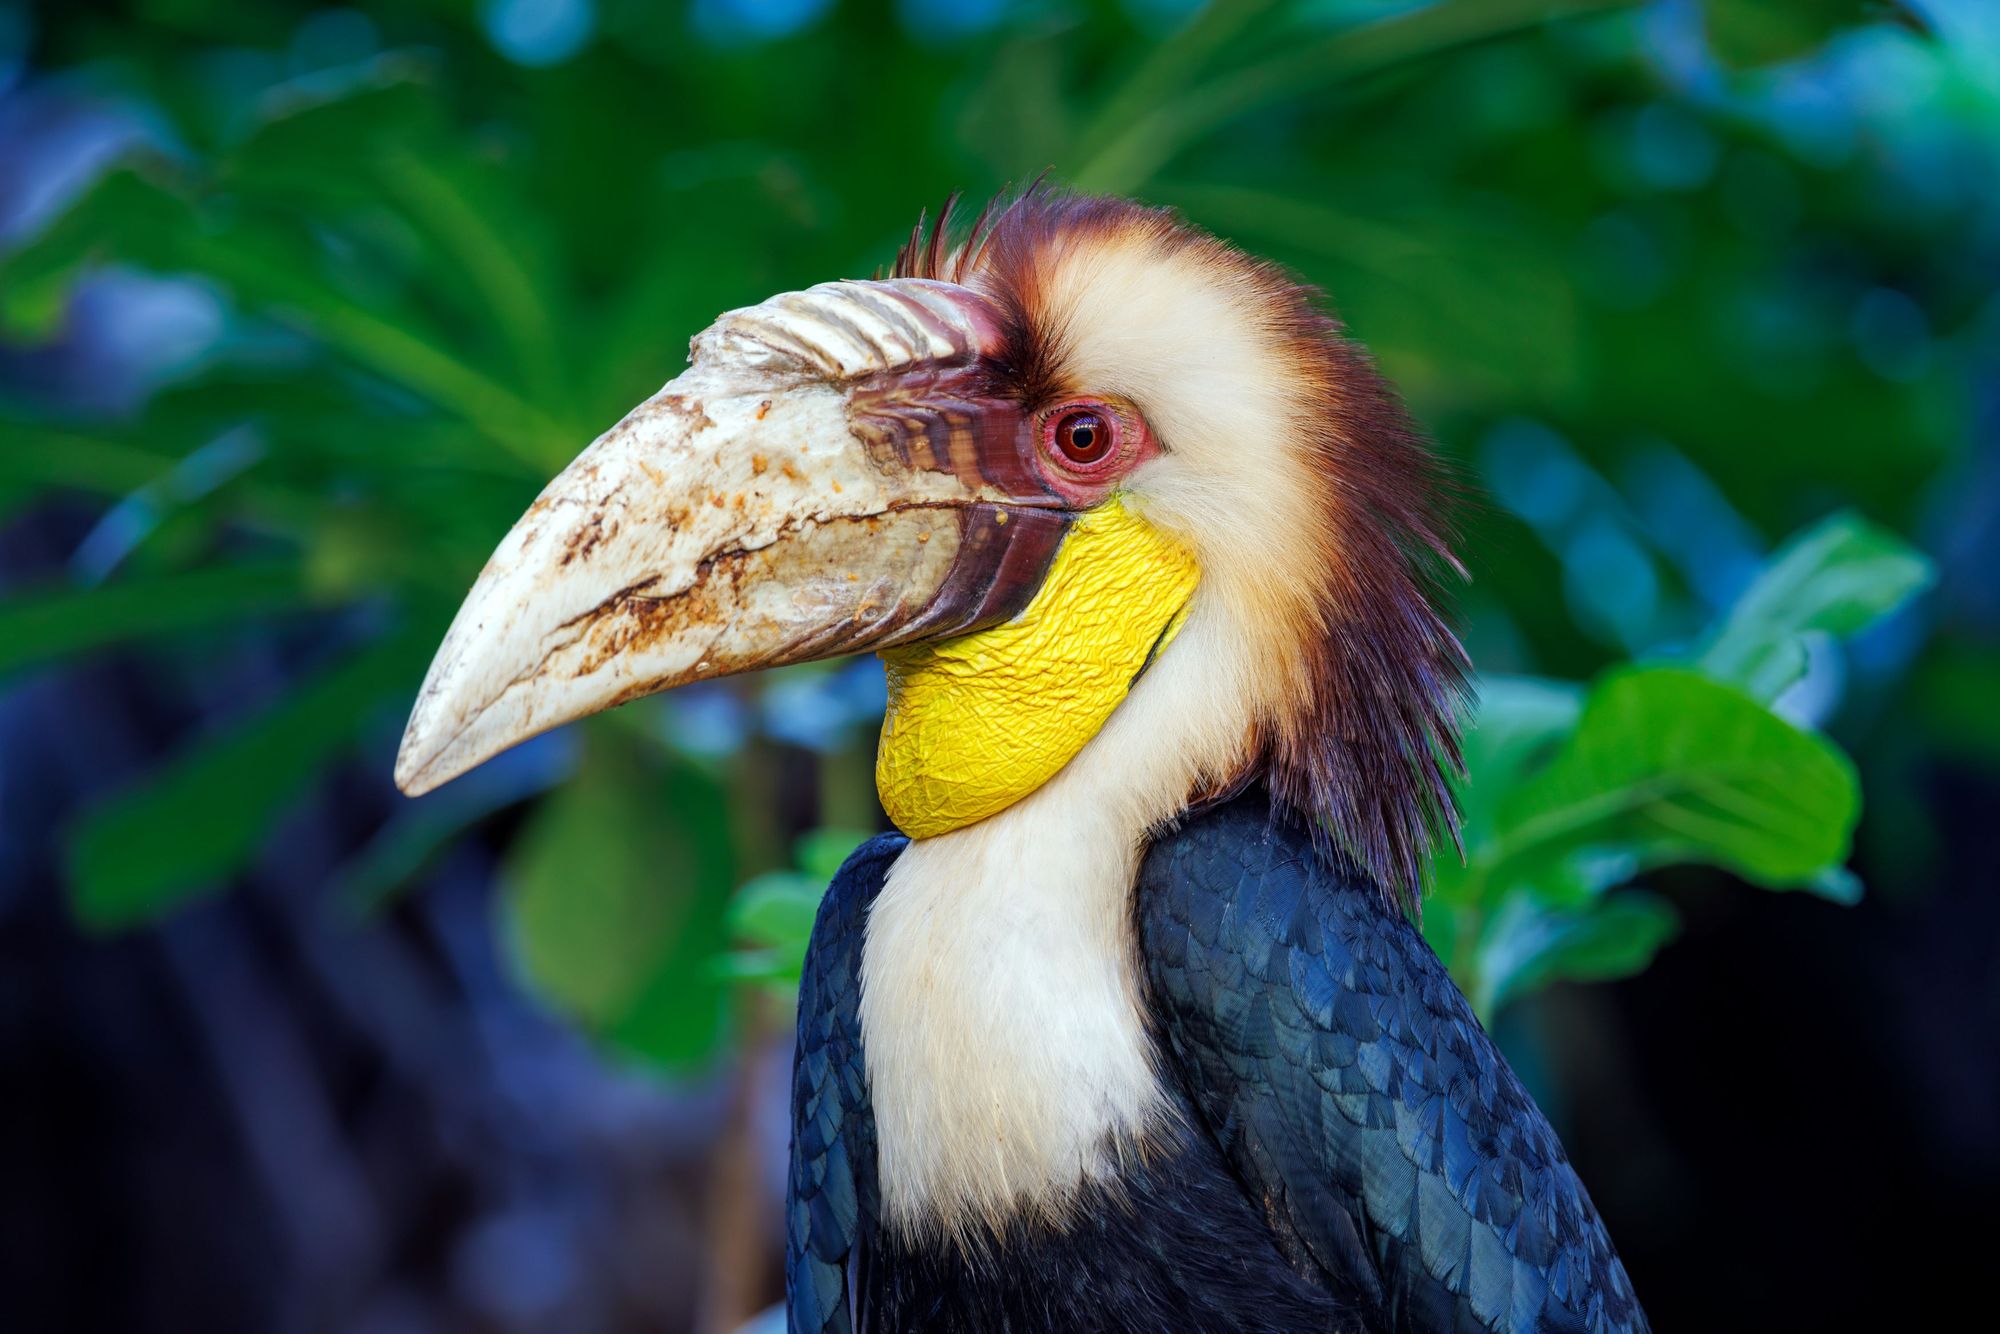 A Hornbill hiding in the trees of Taman Nasional Bali Barat, in Bali. Photo: Getty